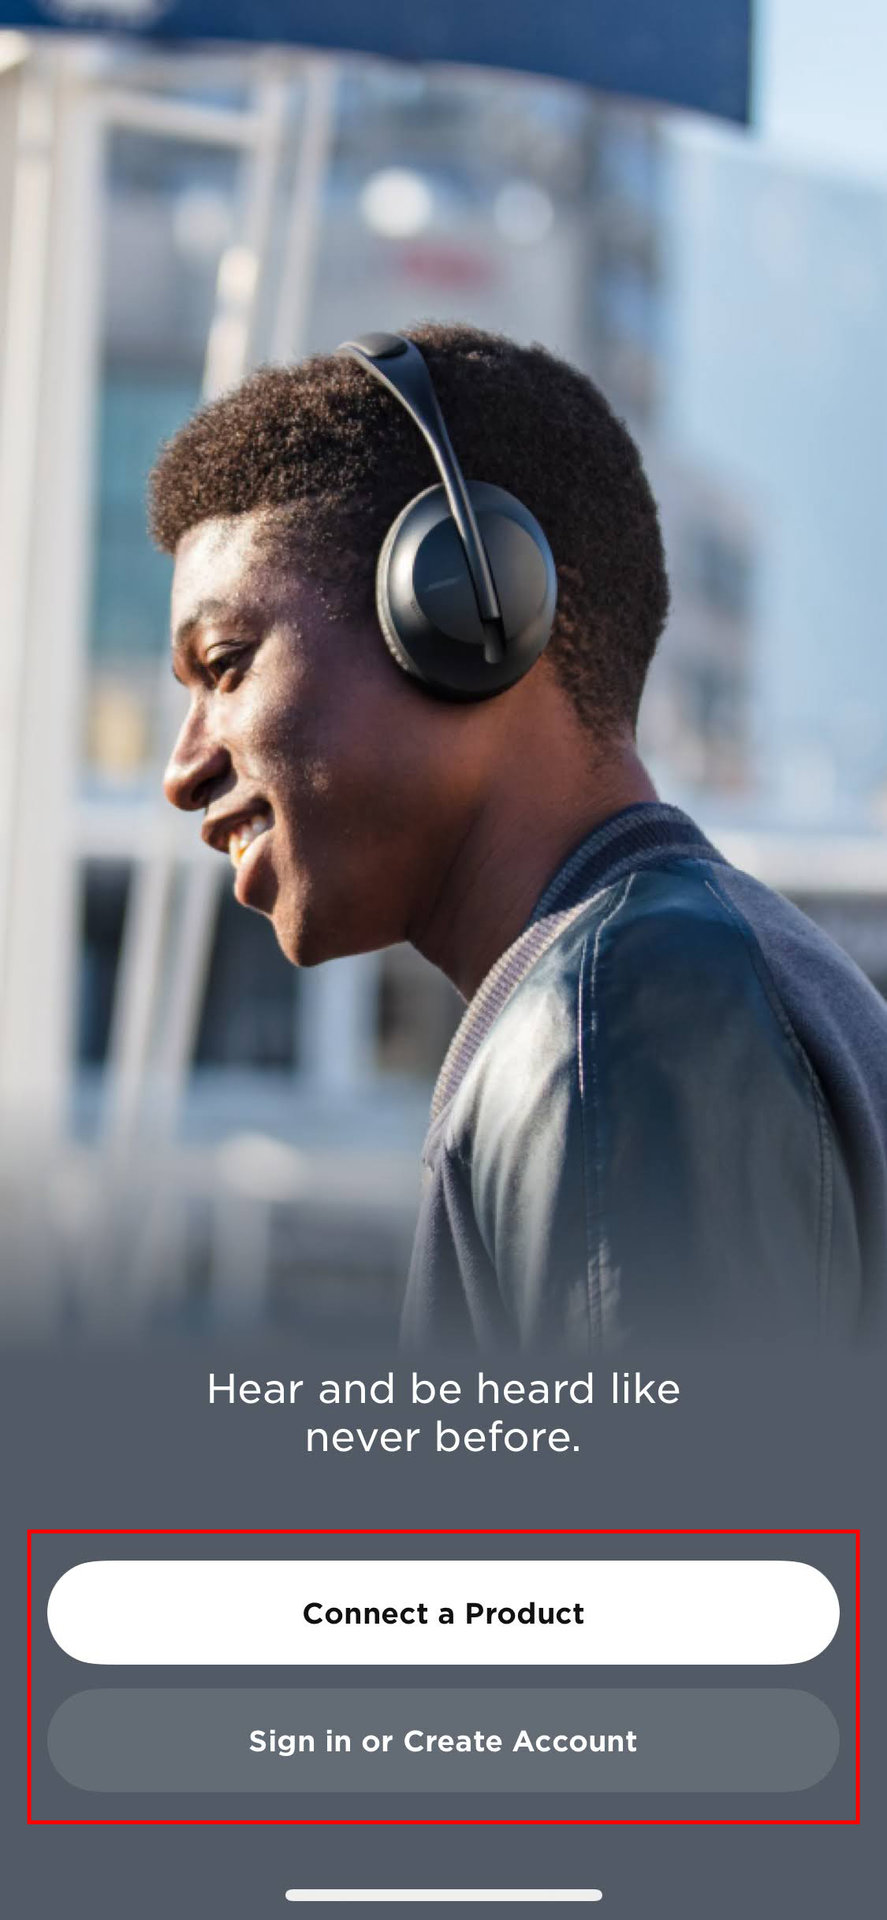 How to pair Bose headphones to an iPhone using the Bose Music app (1)